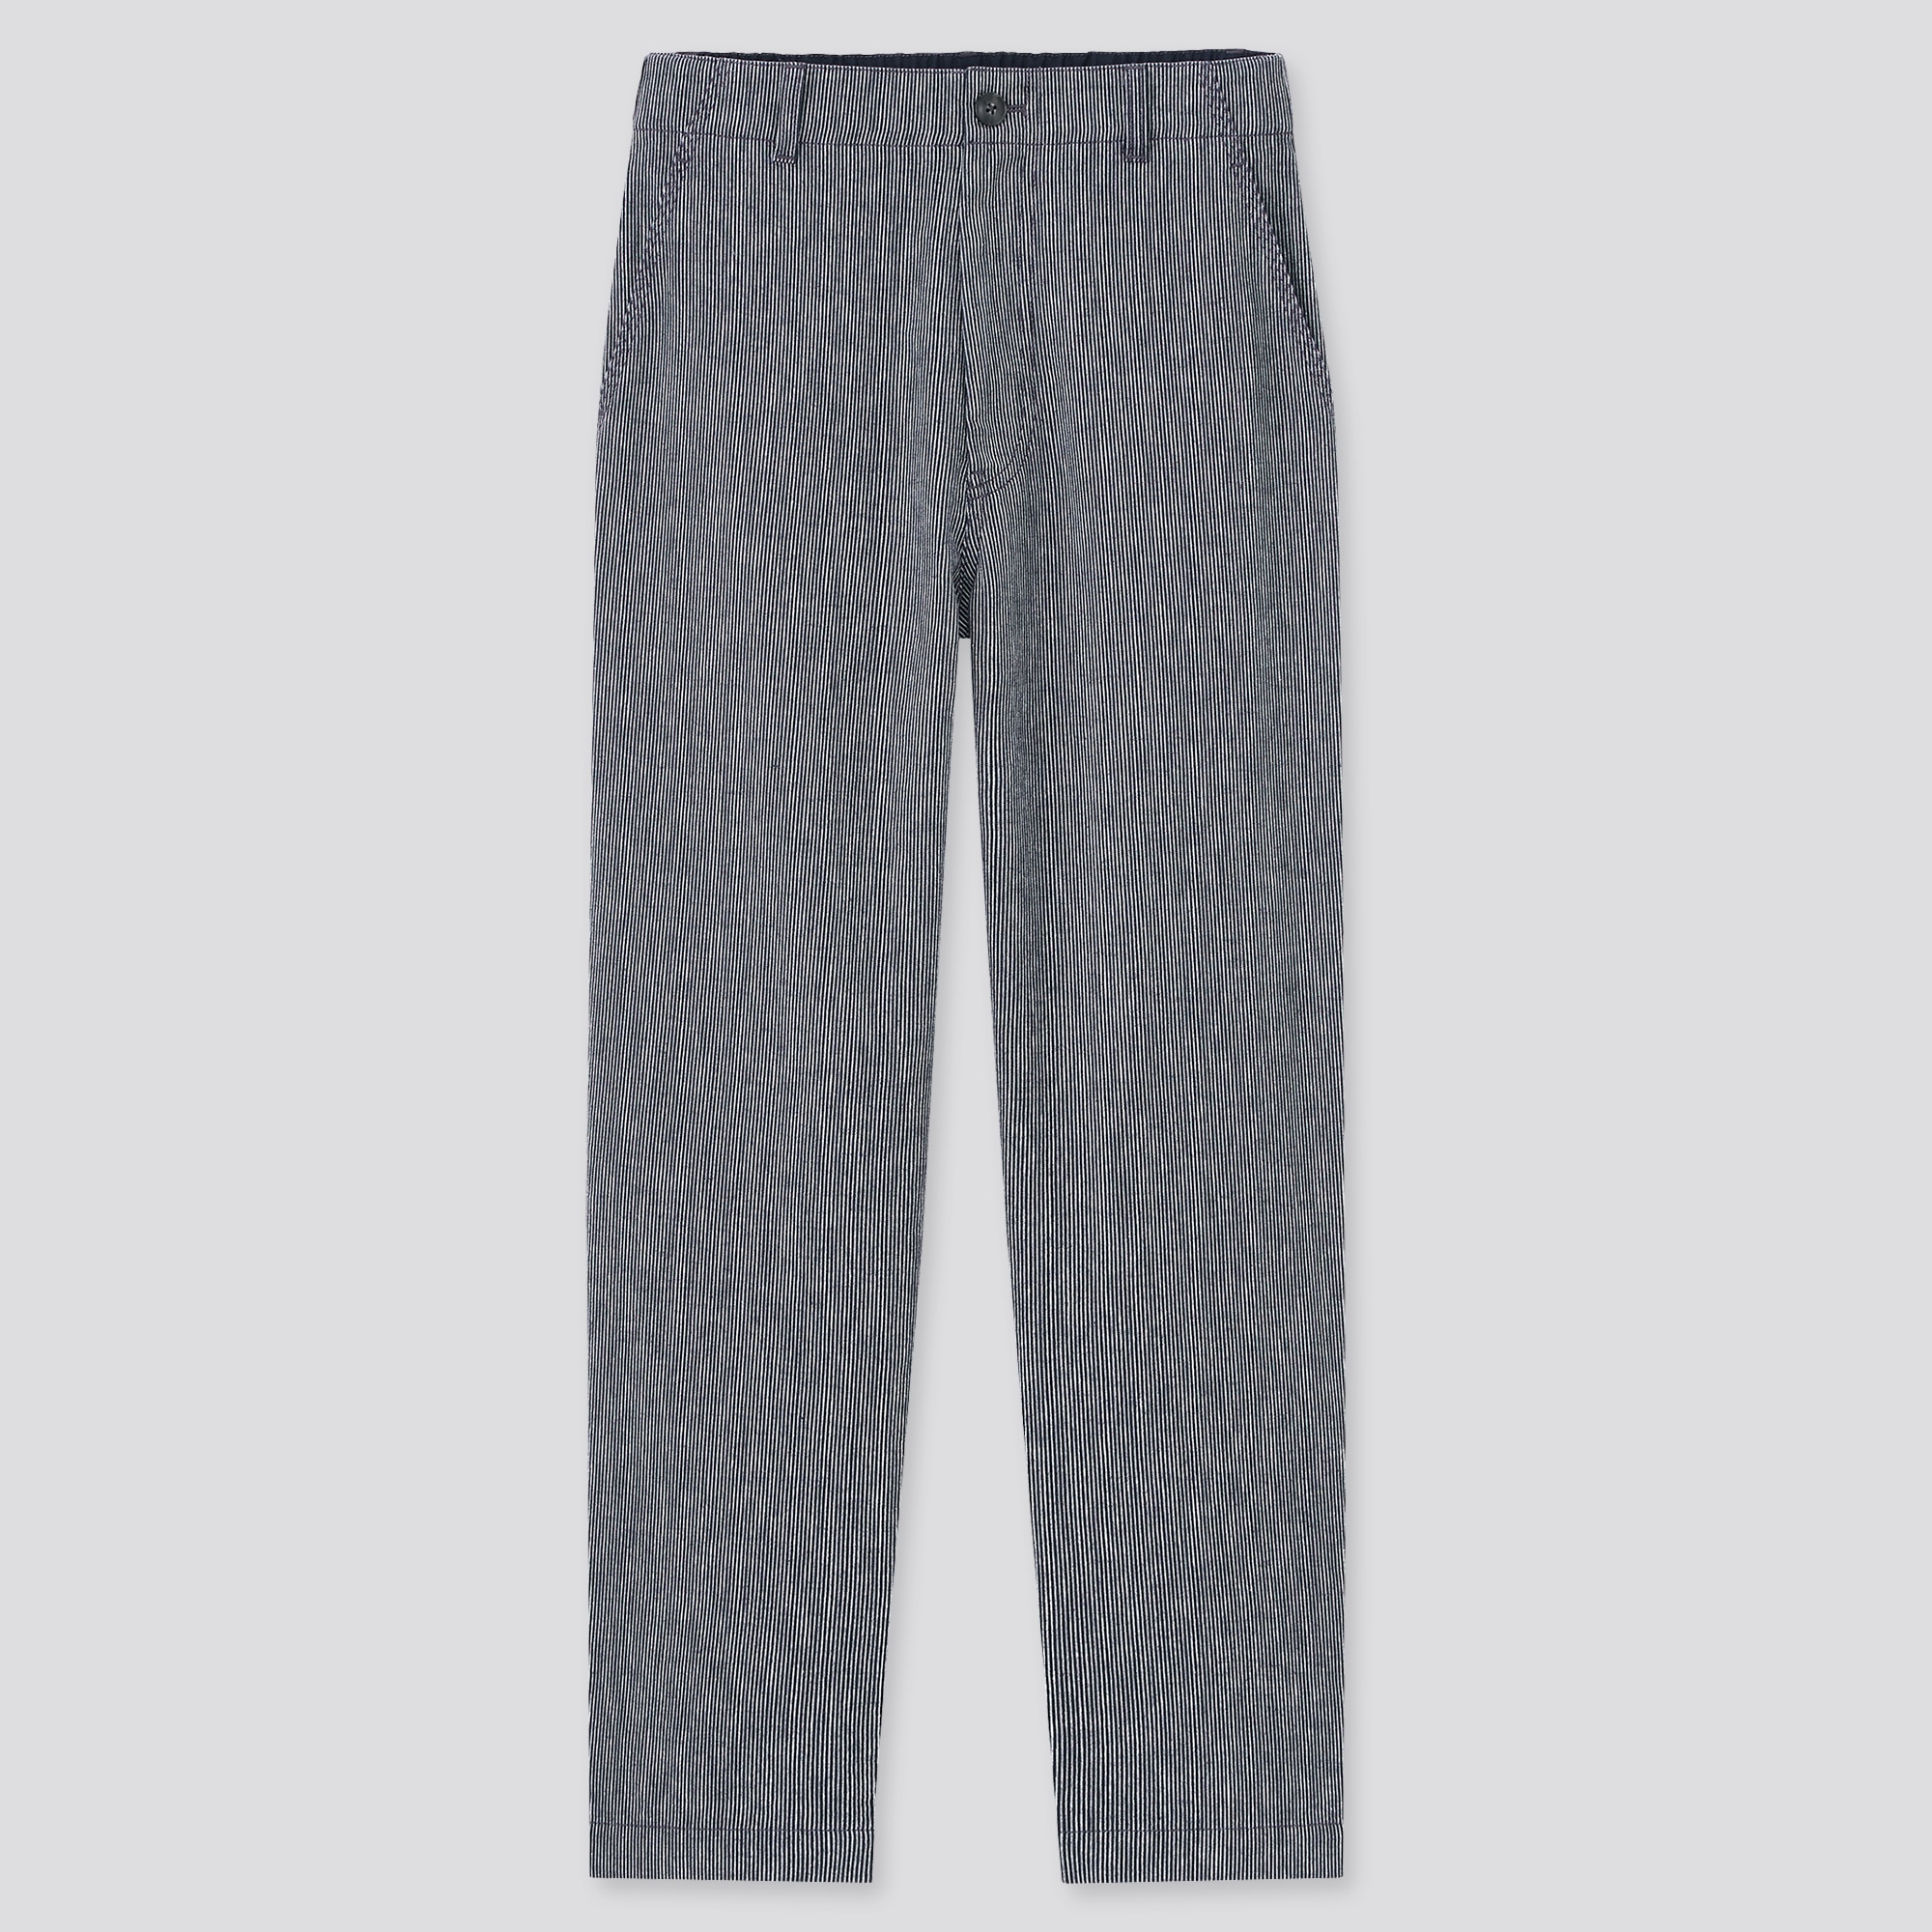 Uniqlo Linen-Cotton Tapered Pants